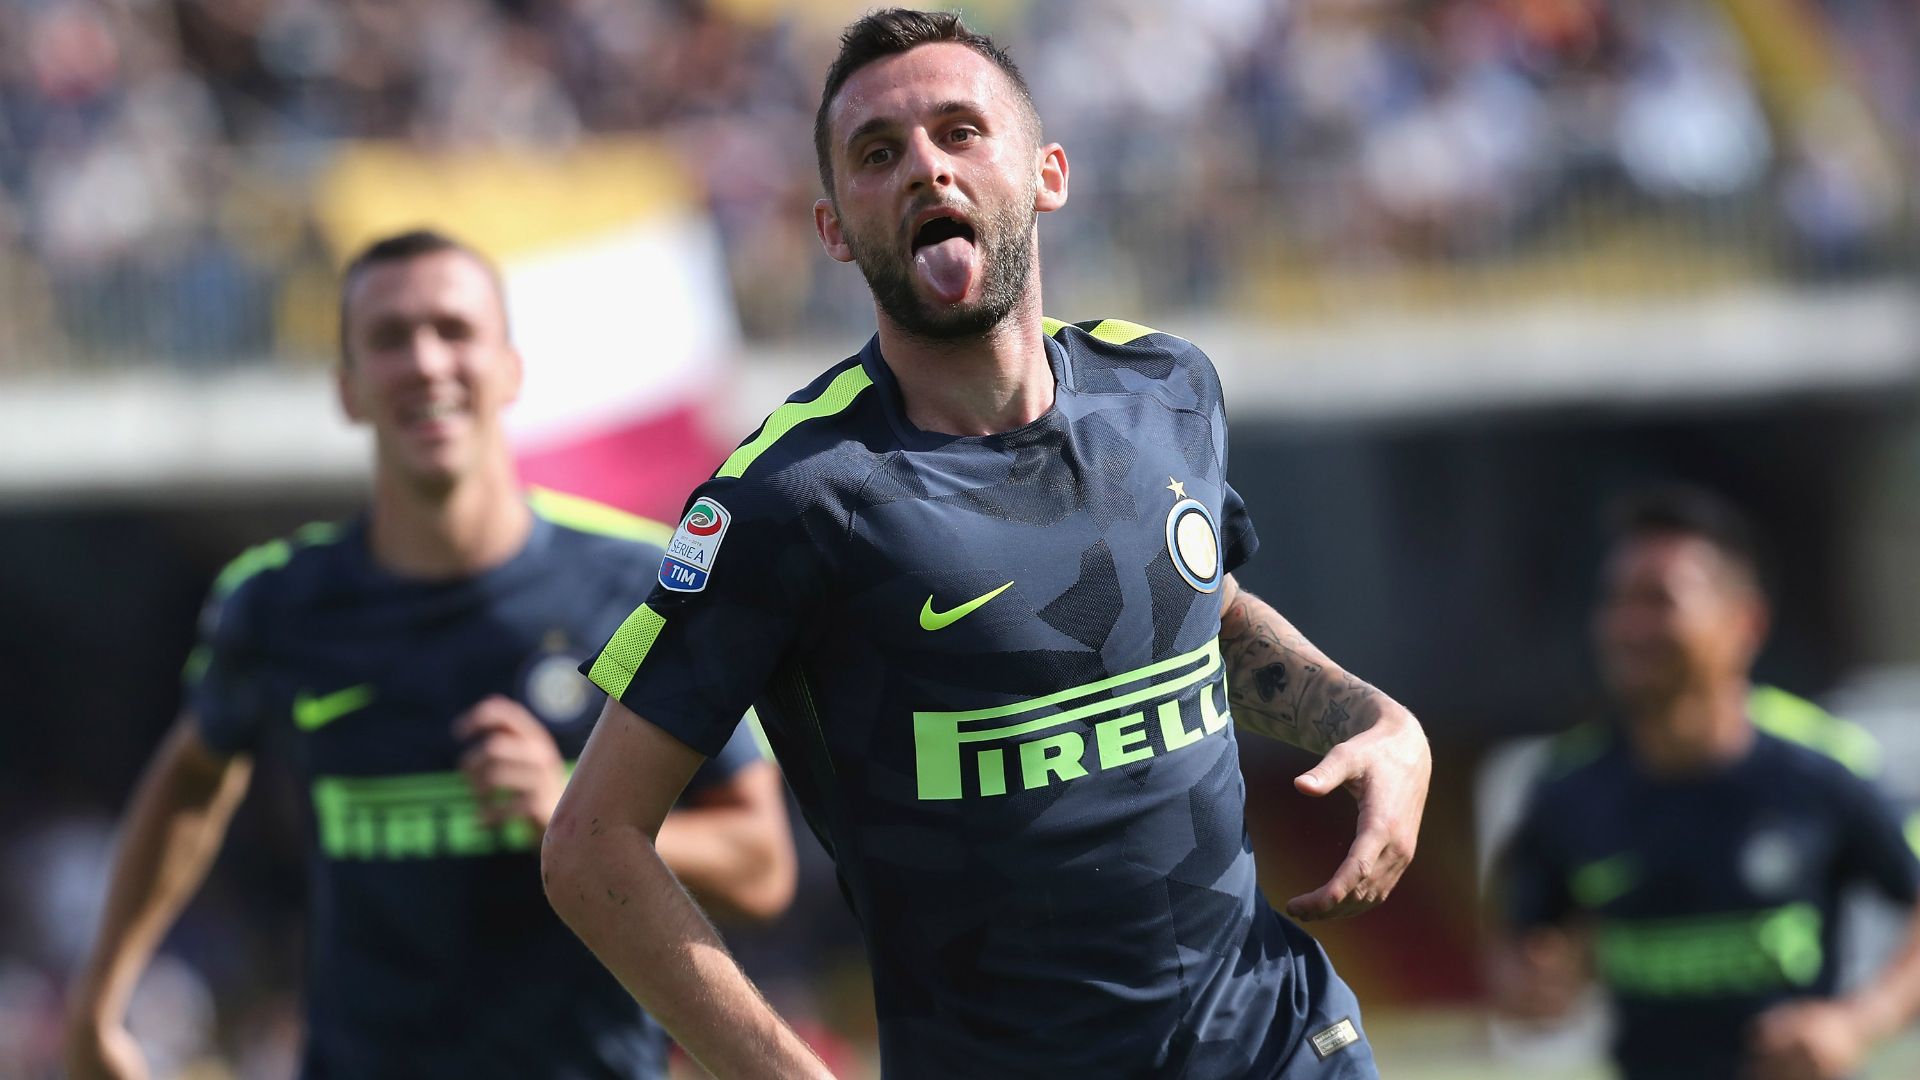 Inter Boss Spalletti Impressed With Two Goal Brozovic